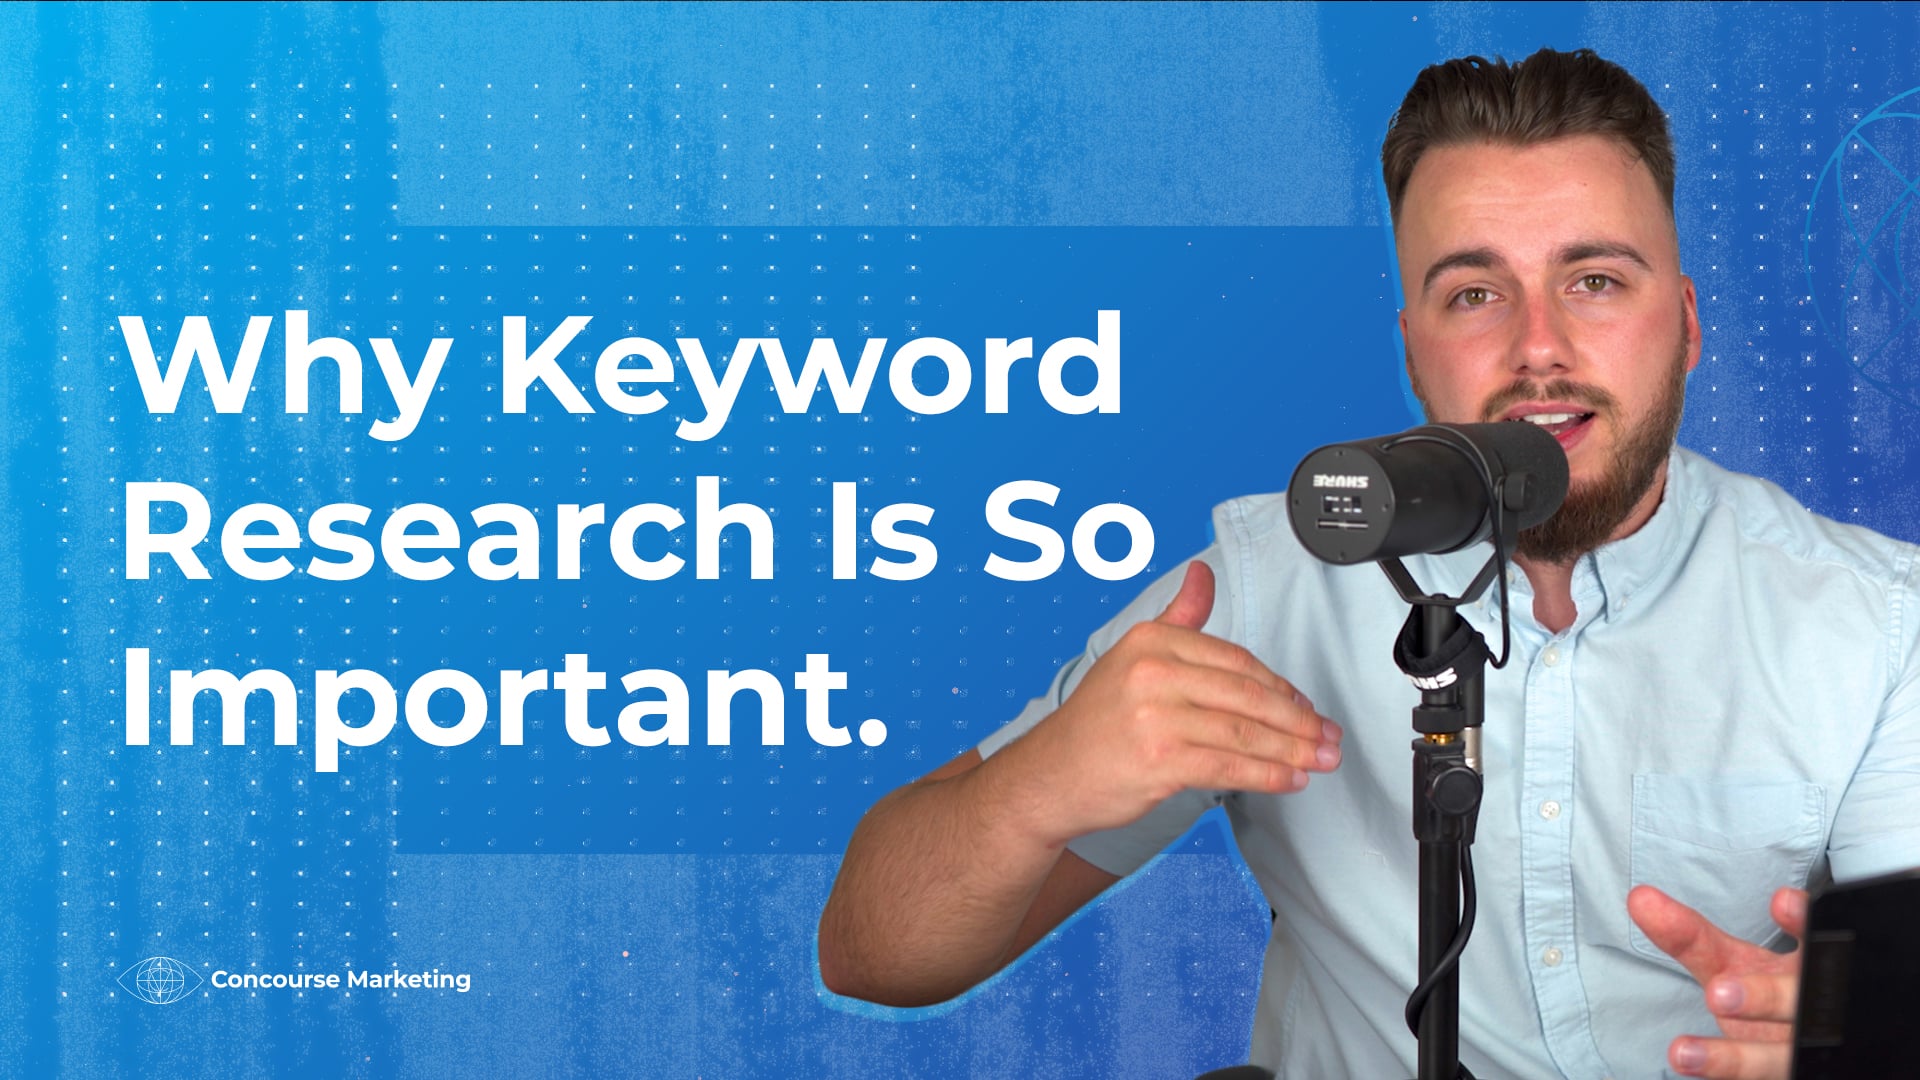 why keyword research is so important video thumbnail.